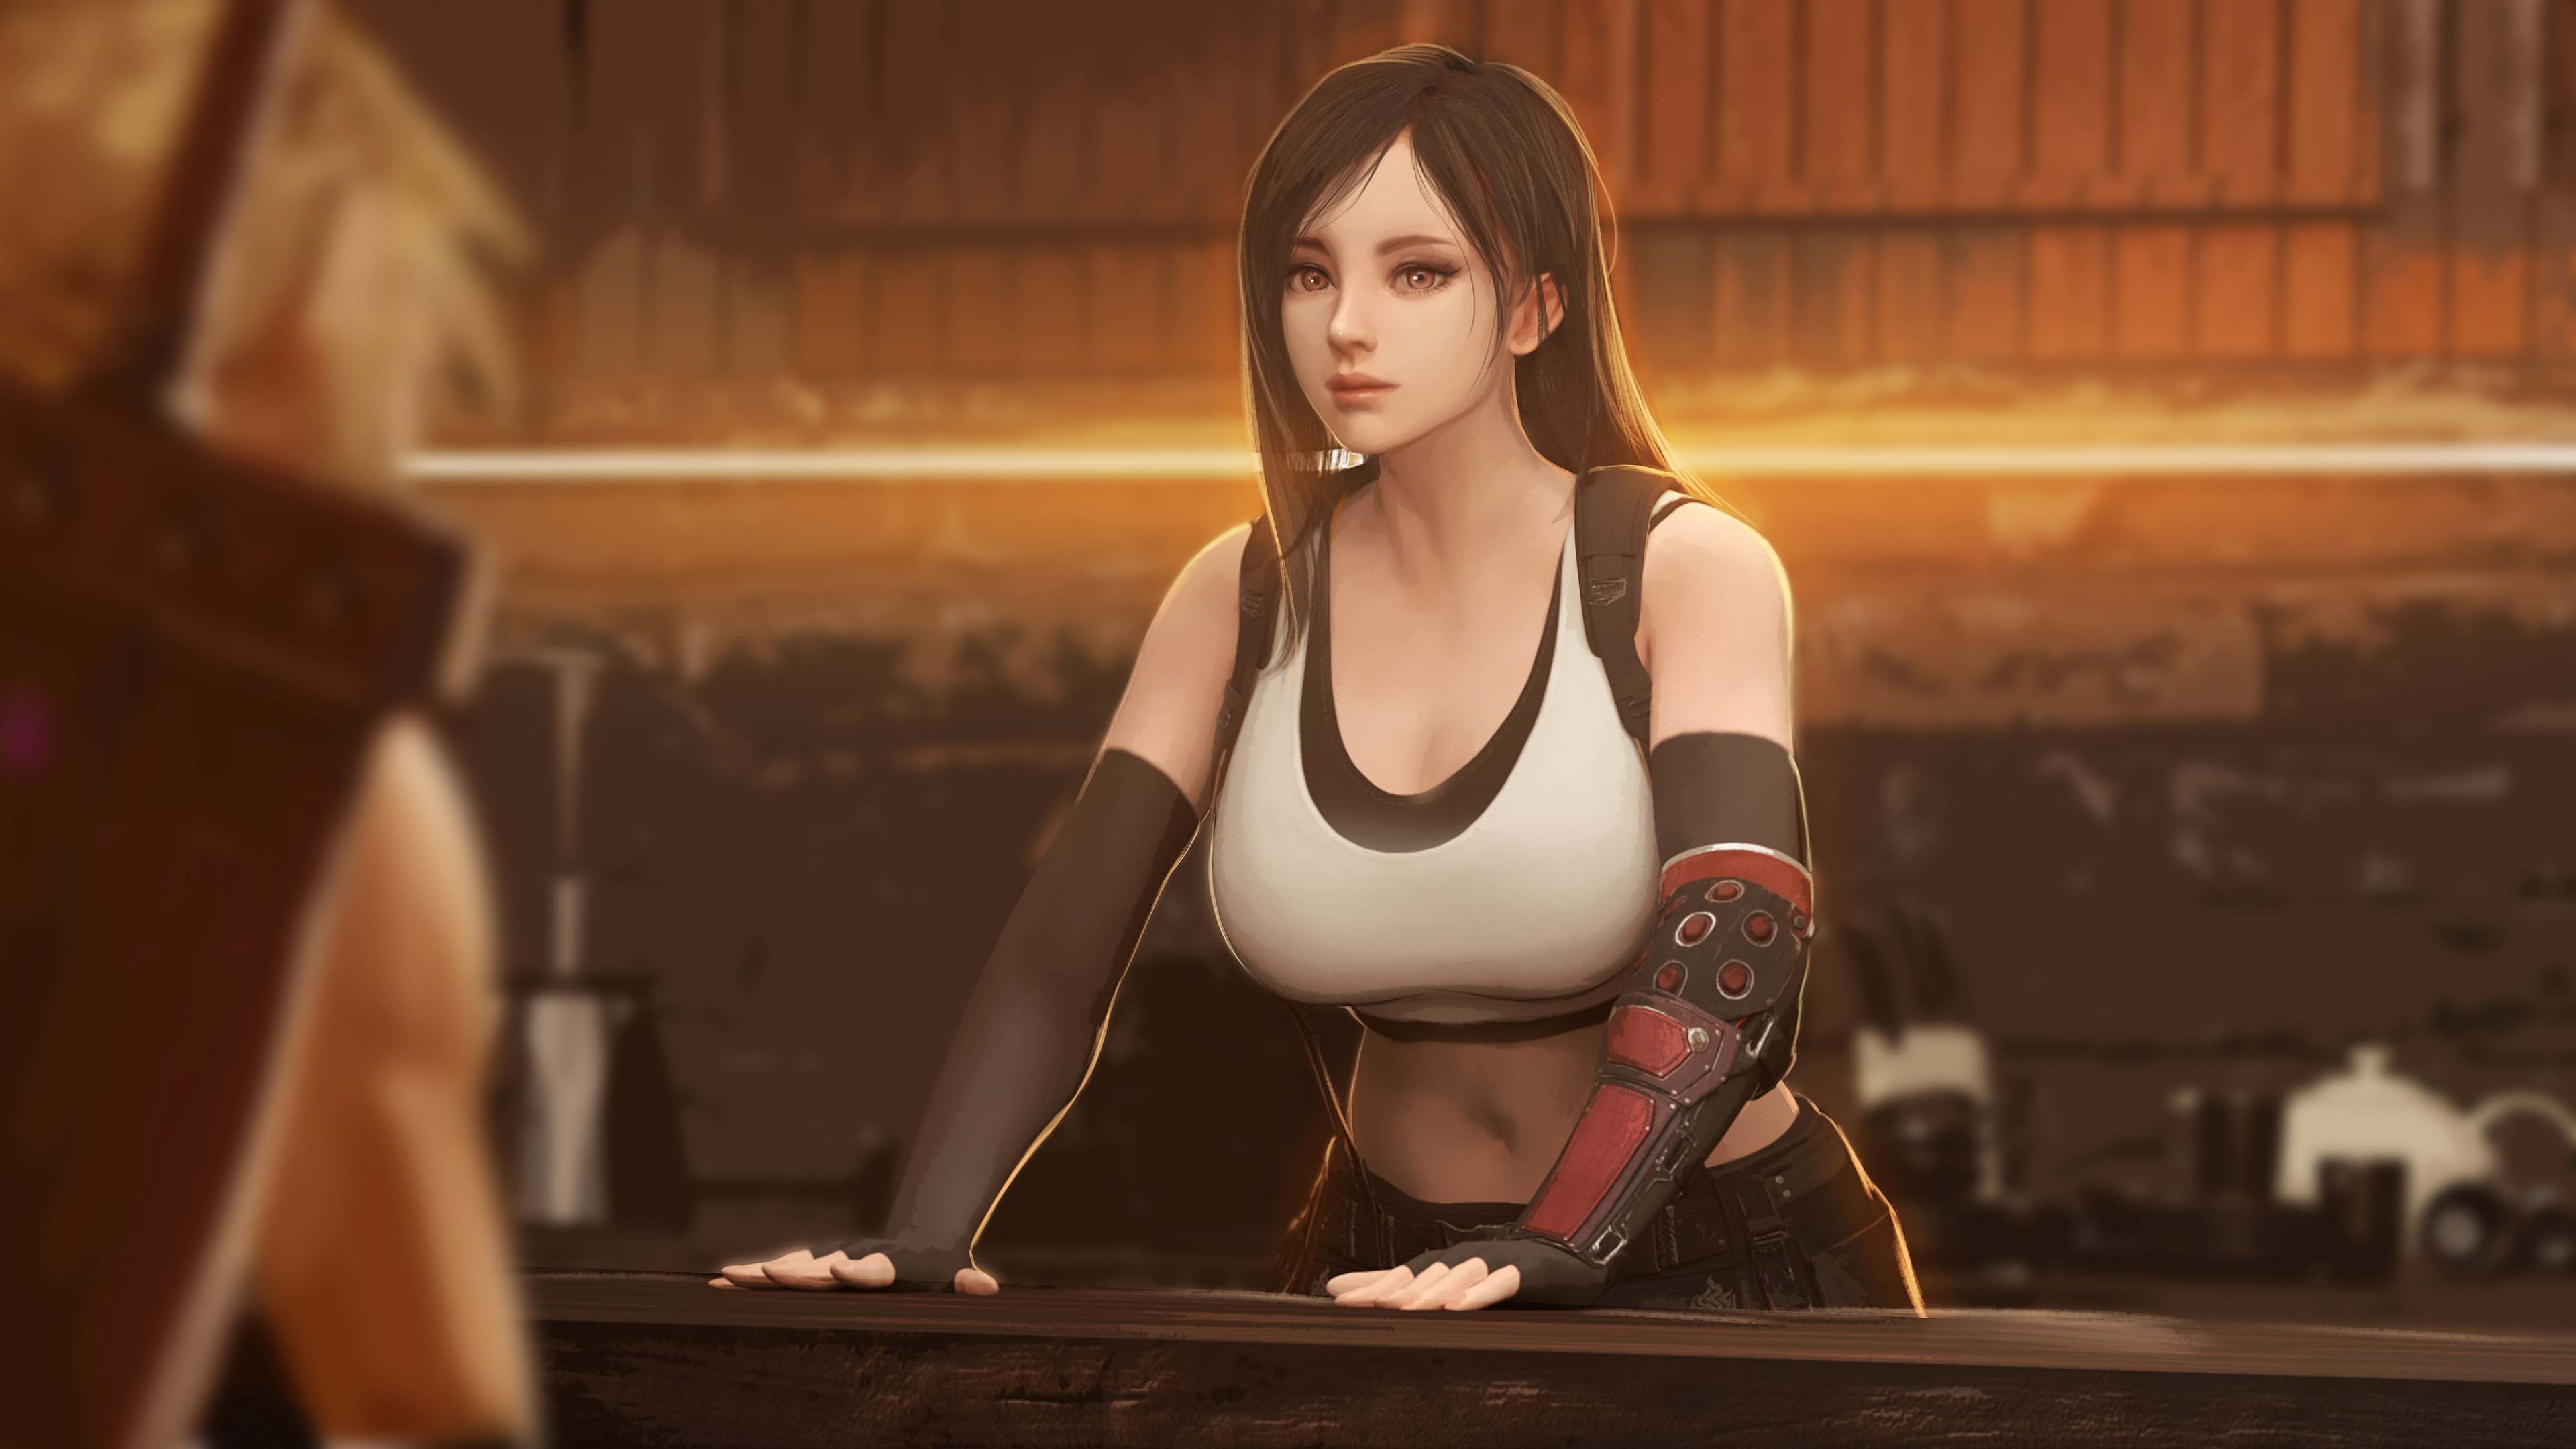 Final Fantasy VII Remake Official Wallpapers of Tifa Lockhart and Aerith  Gainsborough Now Available - Siliconera